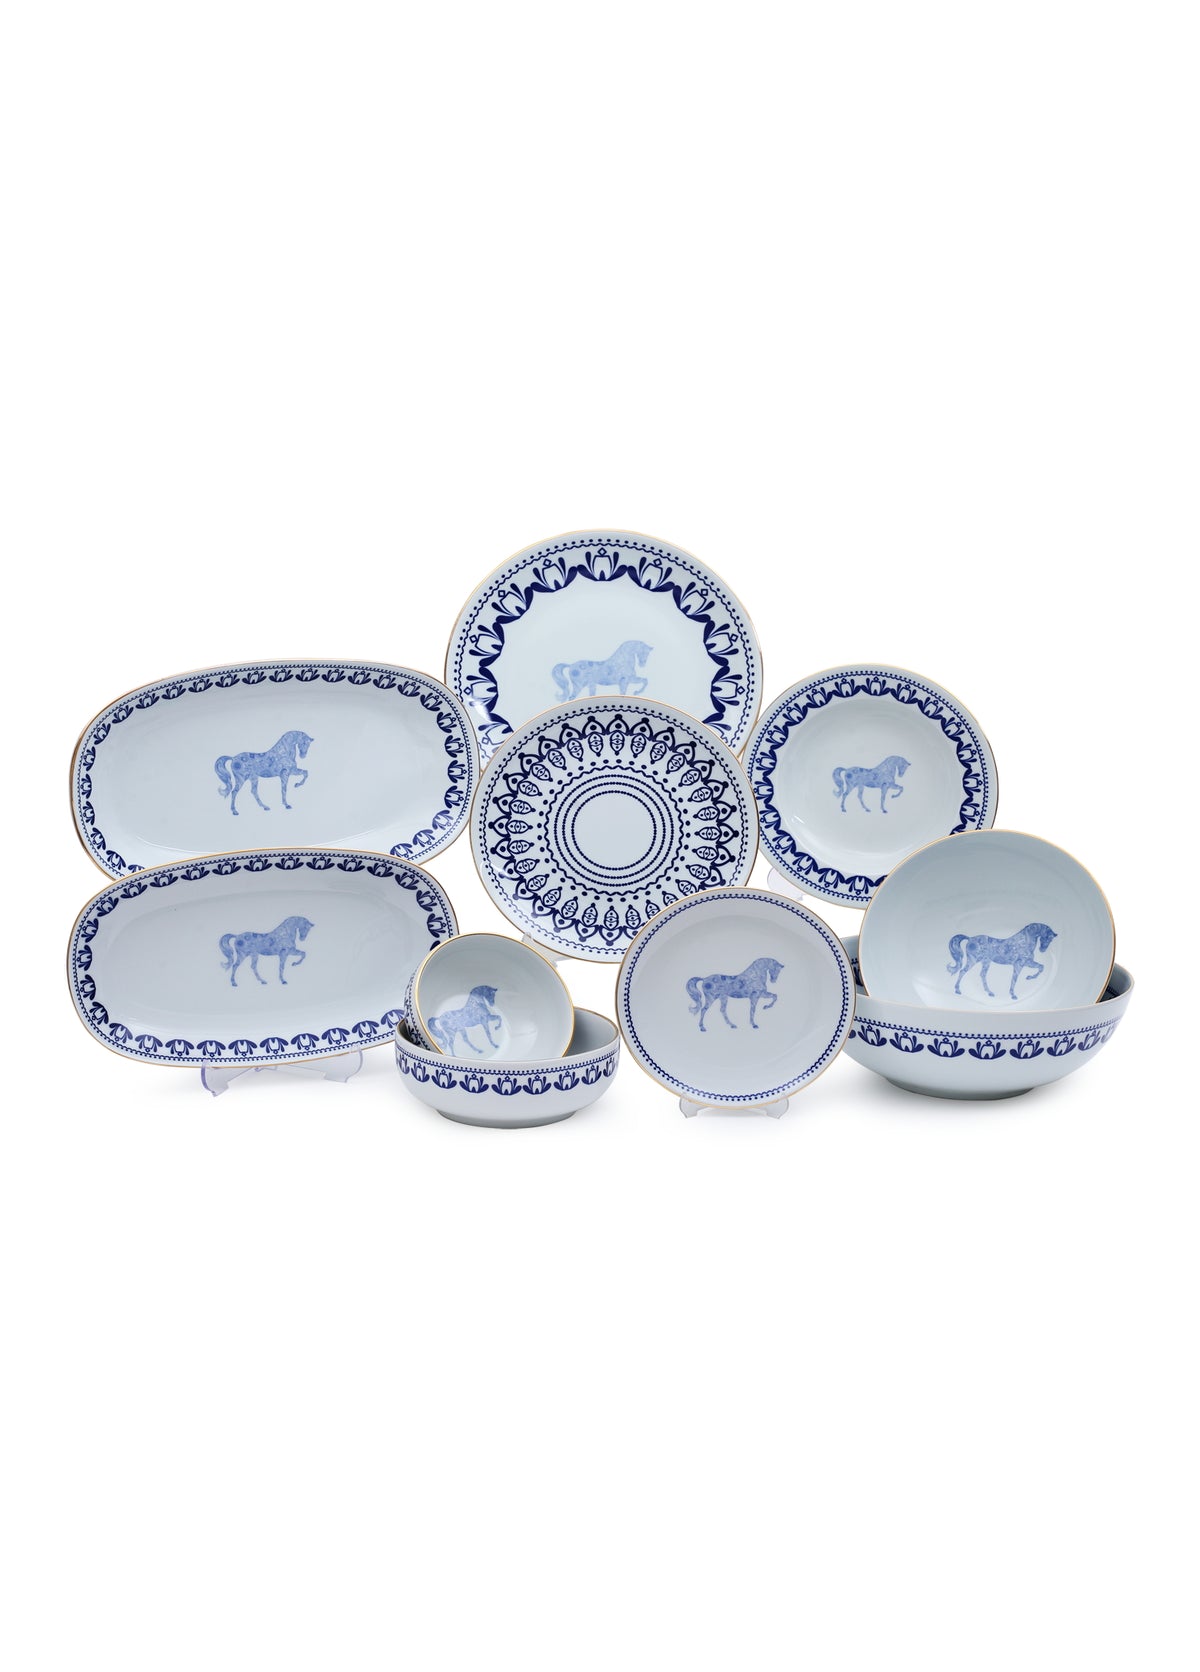 Horse Luck Blue Collection Set of 10 Plates (70 pieces)